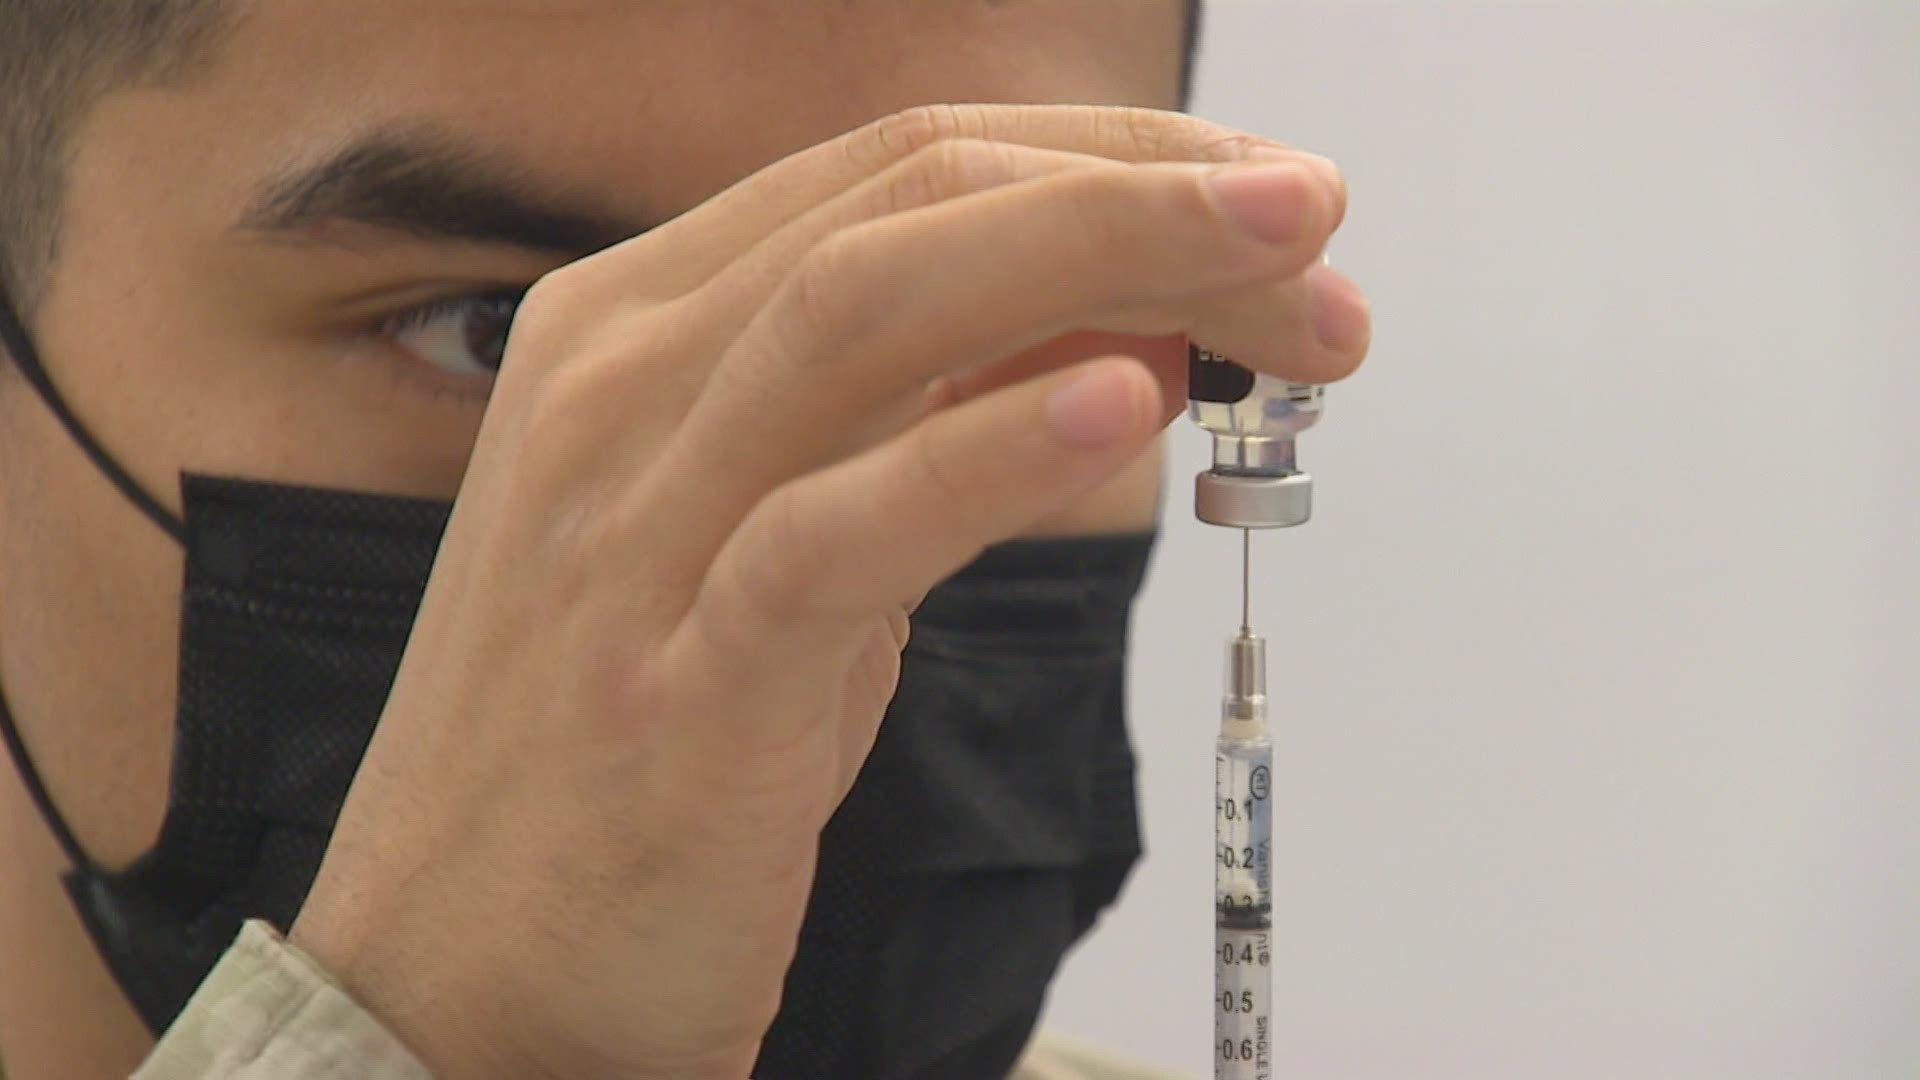 Gov. Inslee also announced a new incentive for medical providers to proactively reach out to patients who have not received their COVID-19 vaccine yet.